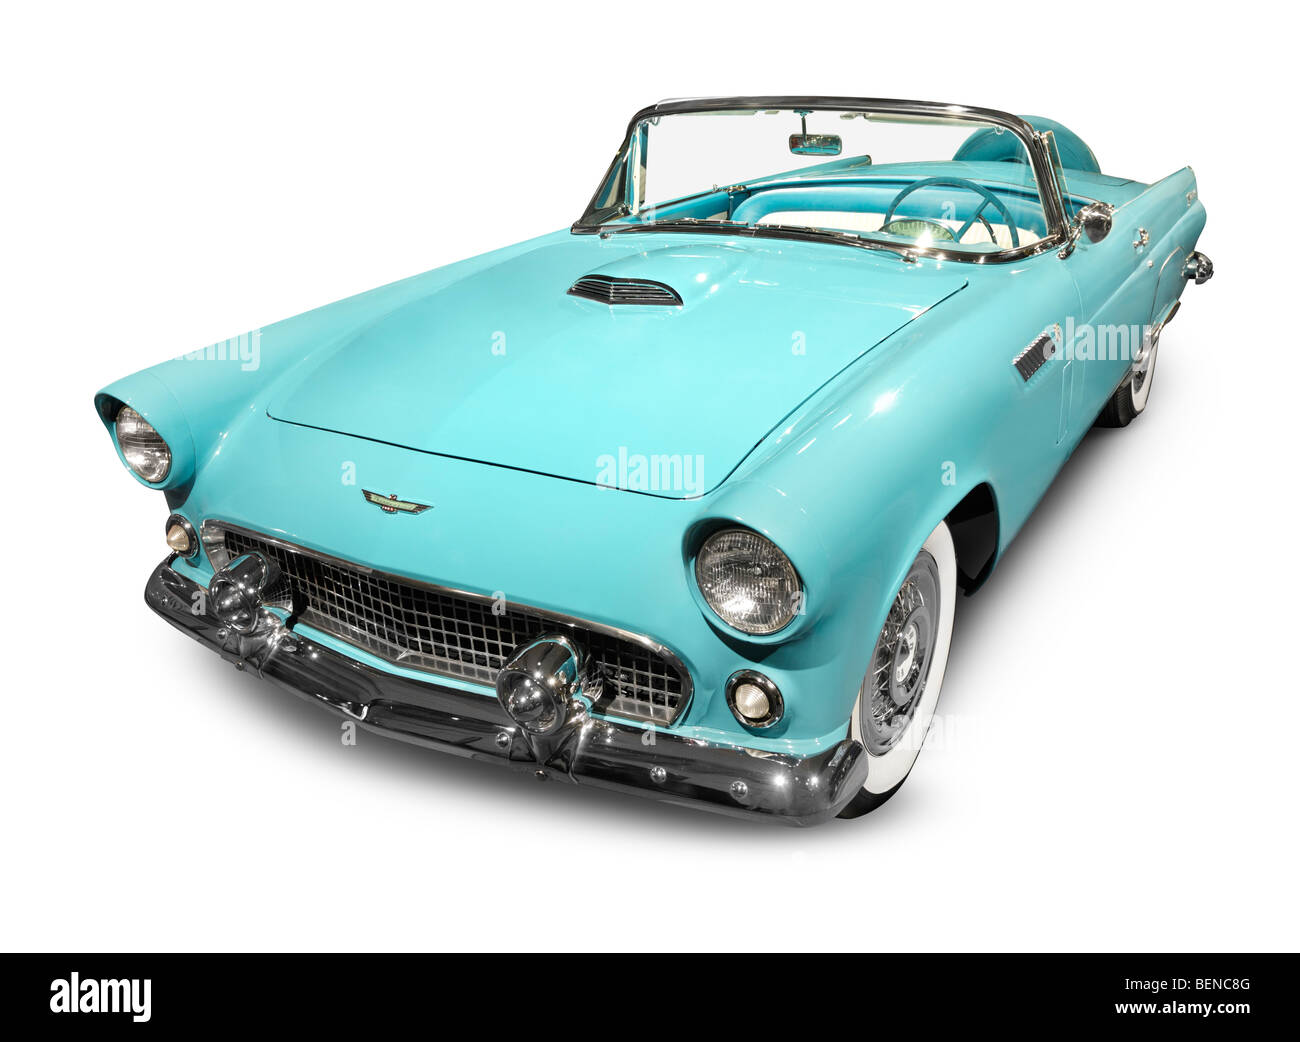 License available at MaximImages.com - Sky-blue 1956 Ford Thunderbird classic retro car on white Stock Photo